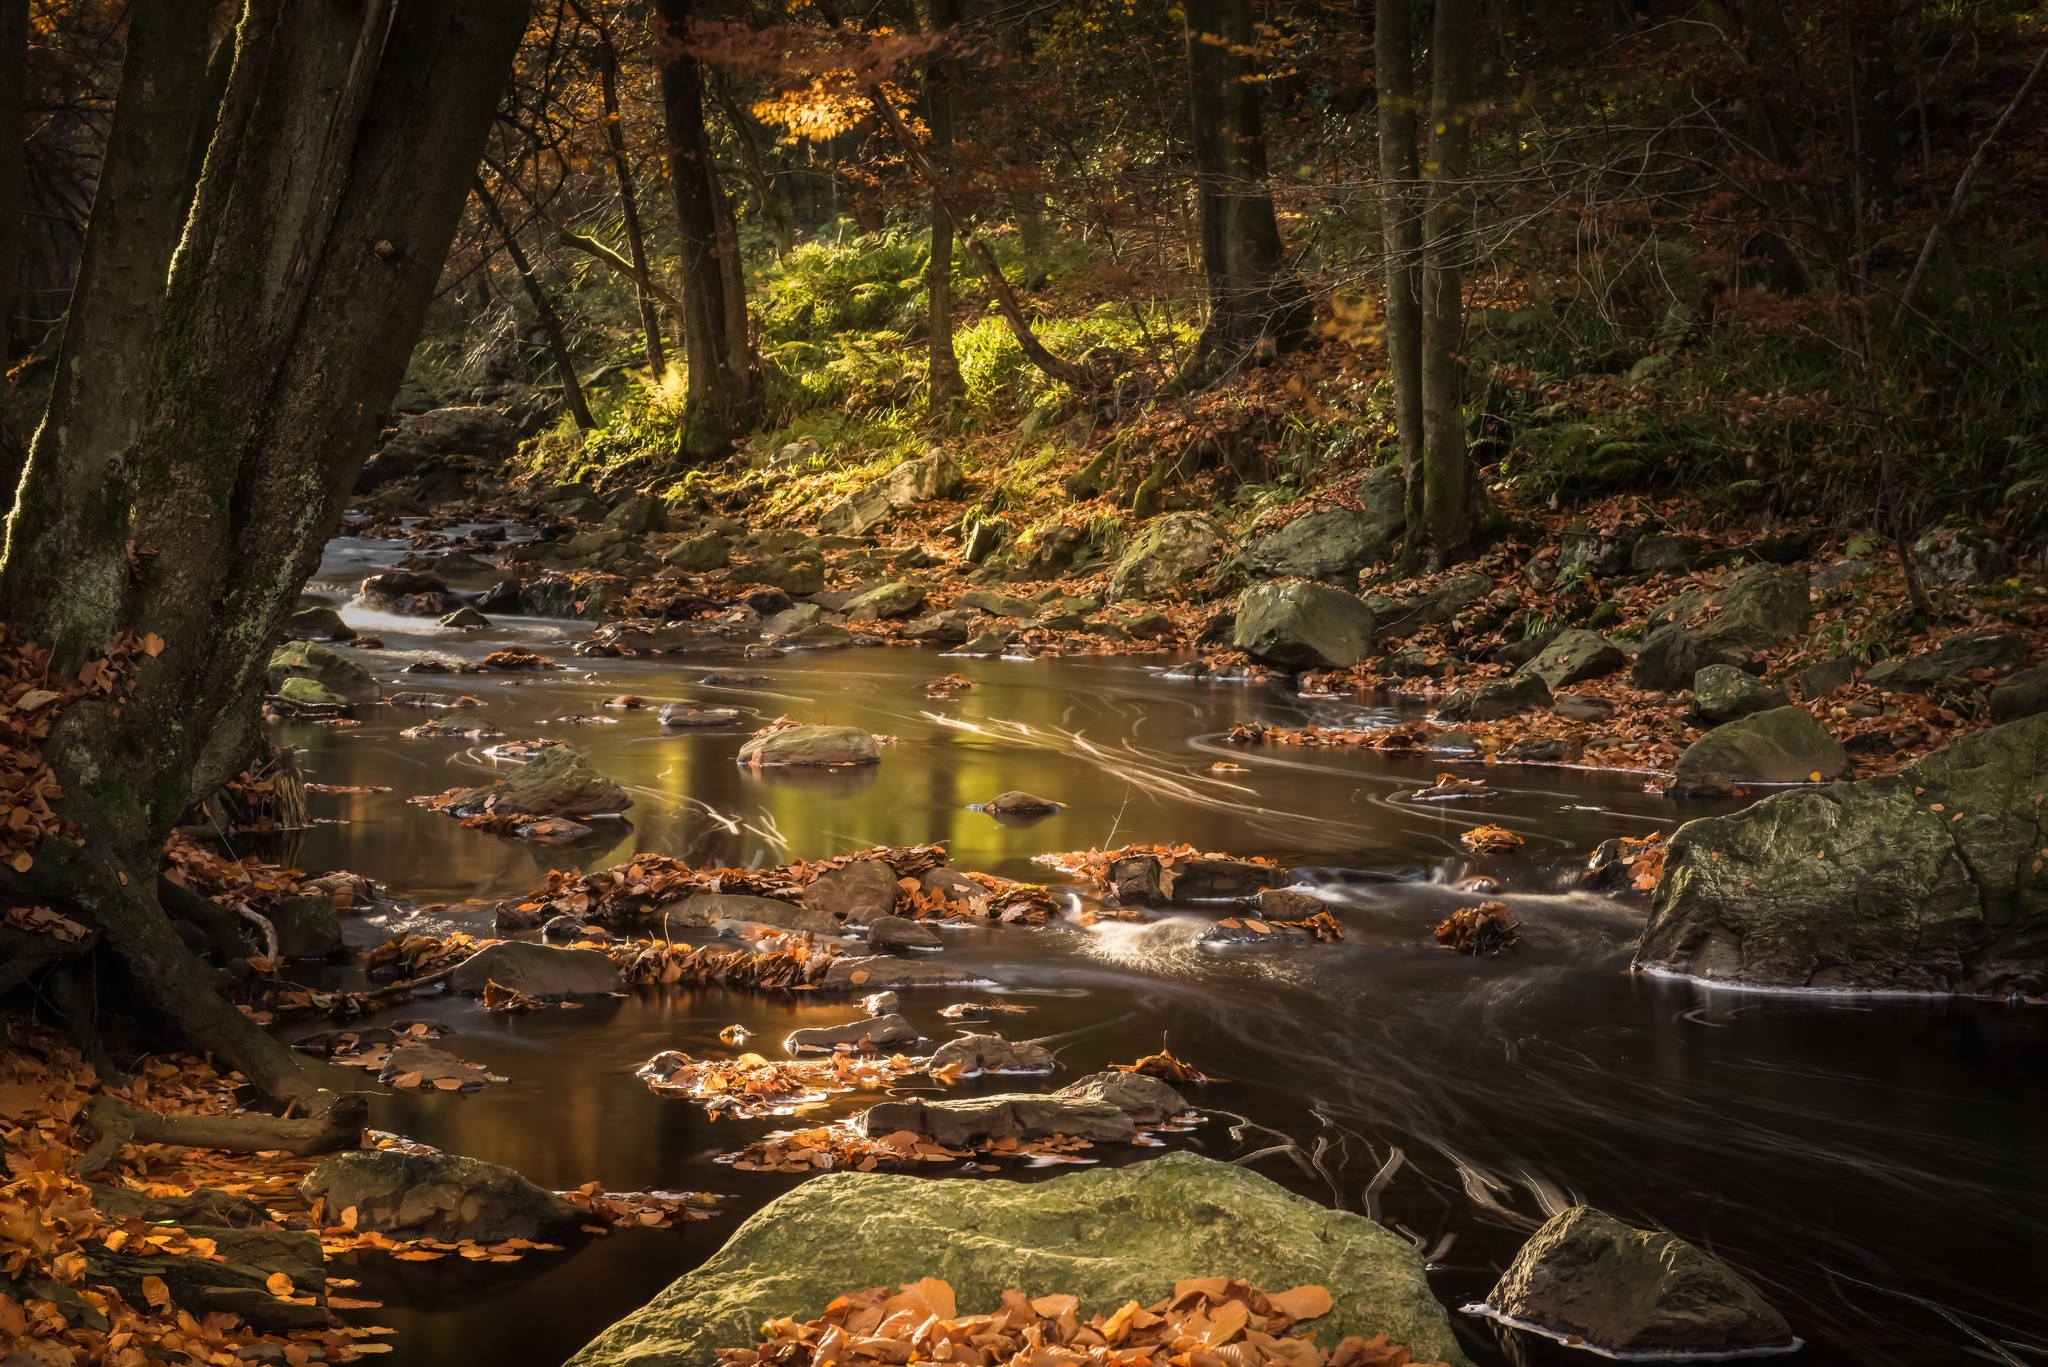 Autumn forest with a stream